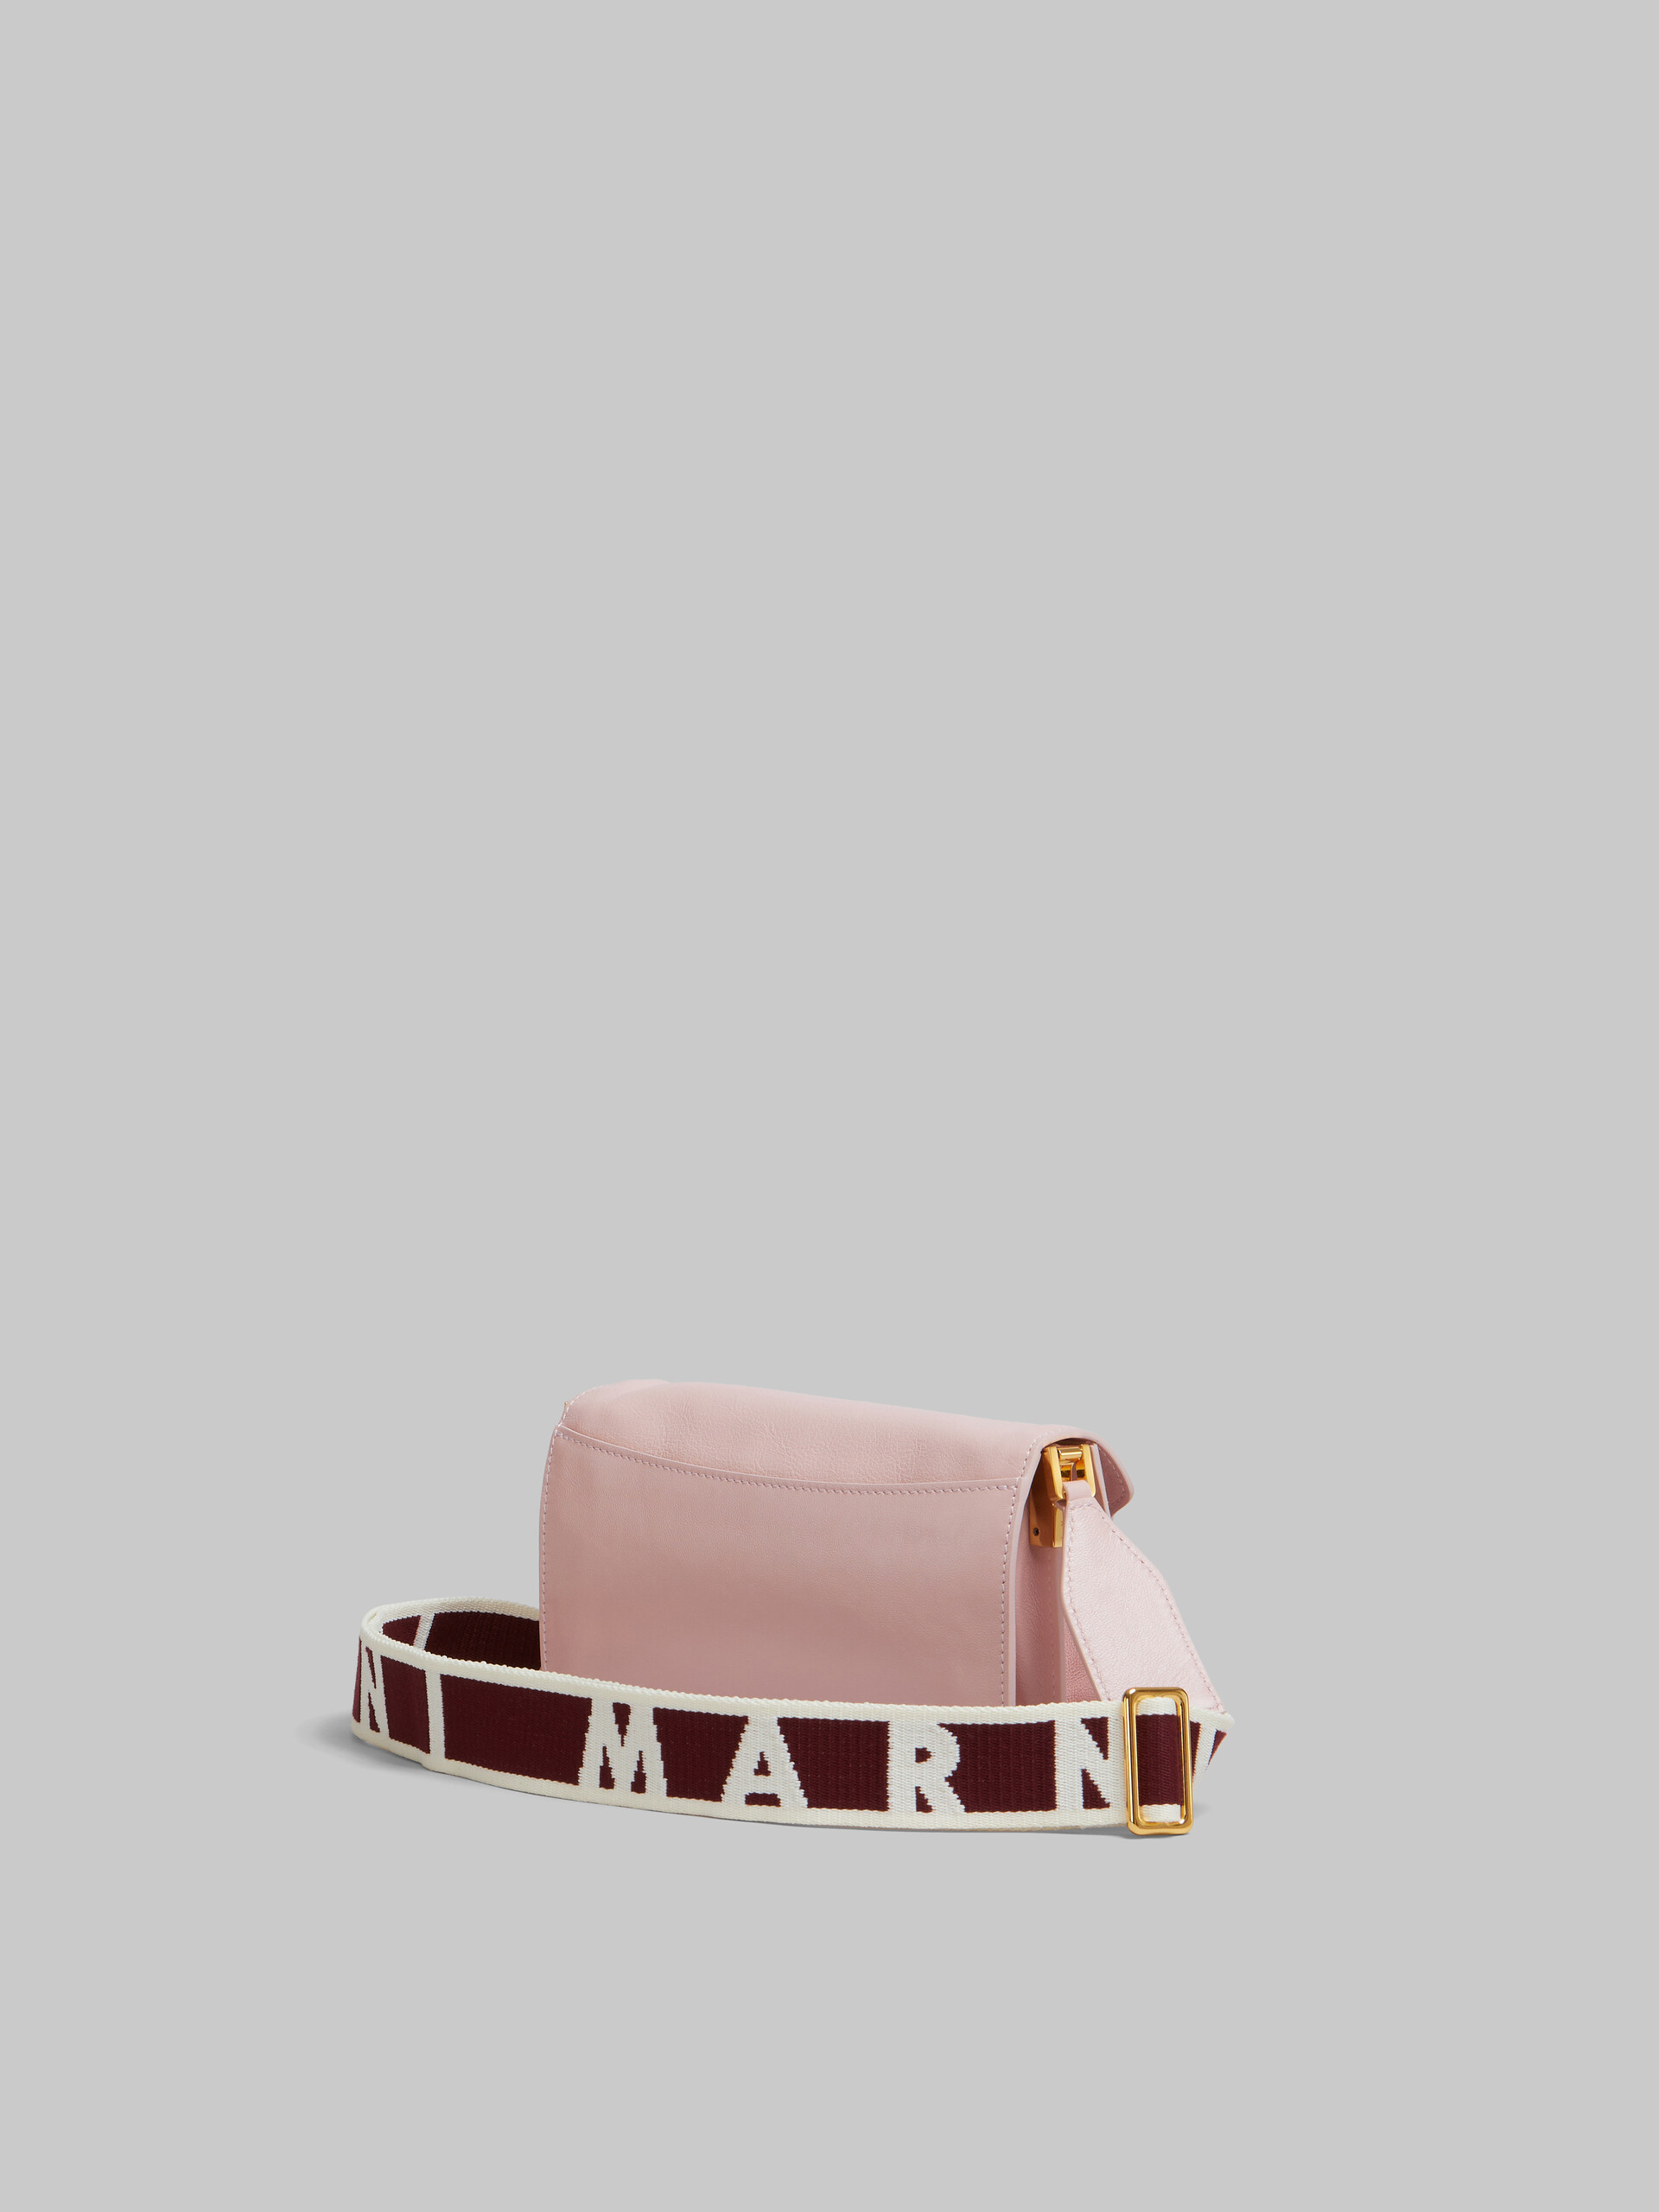 Shop MARNI Pink leather E/W Soft Trunk Bag with logo strap  (SBMP0124Q6P264400C09) by -TAO